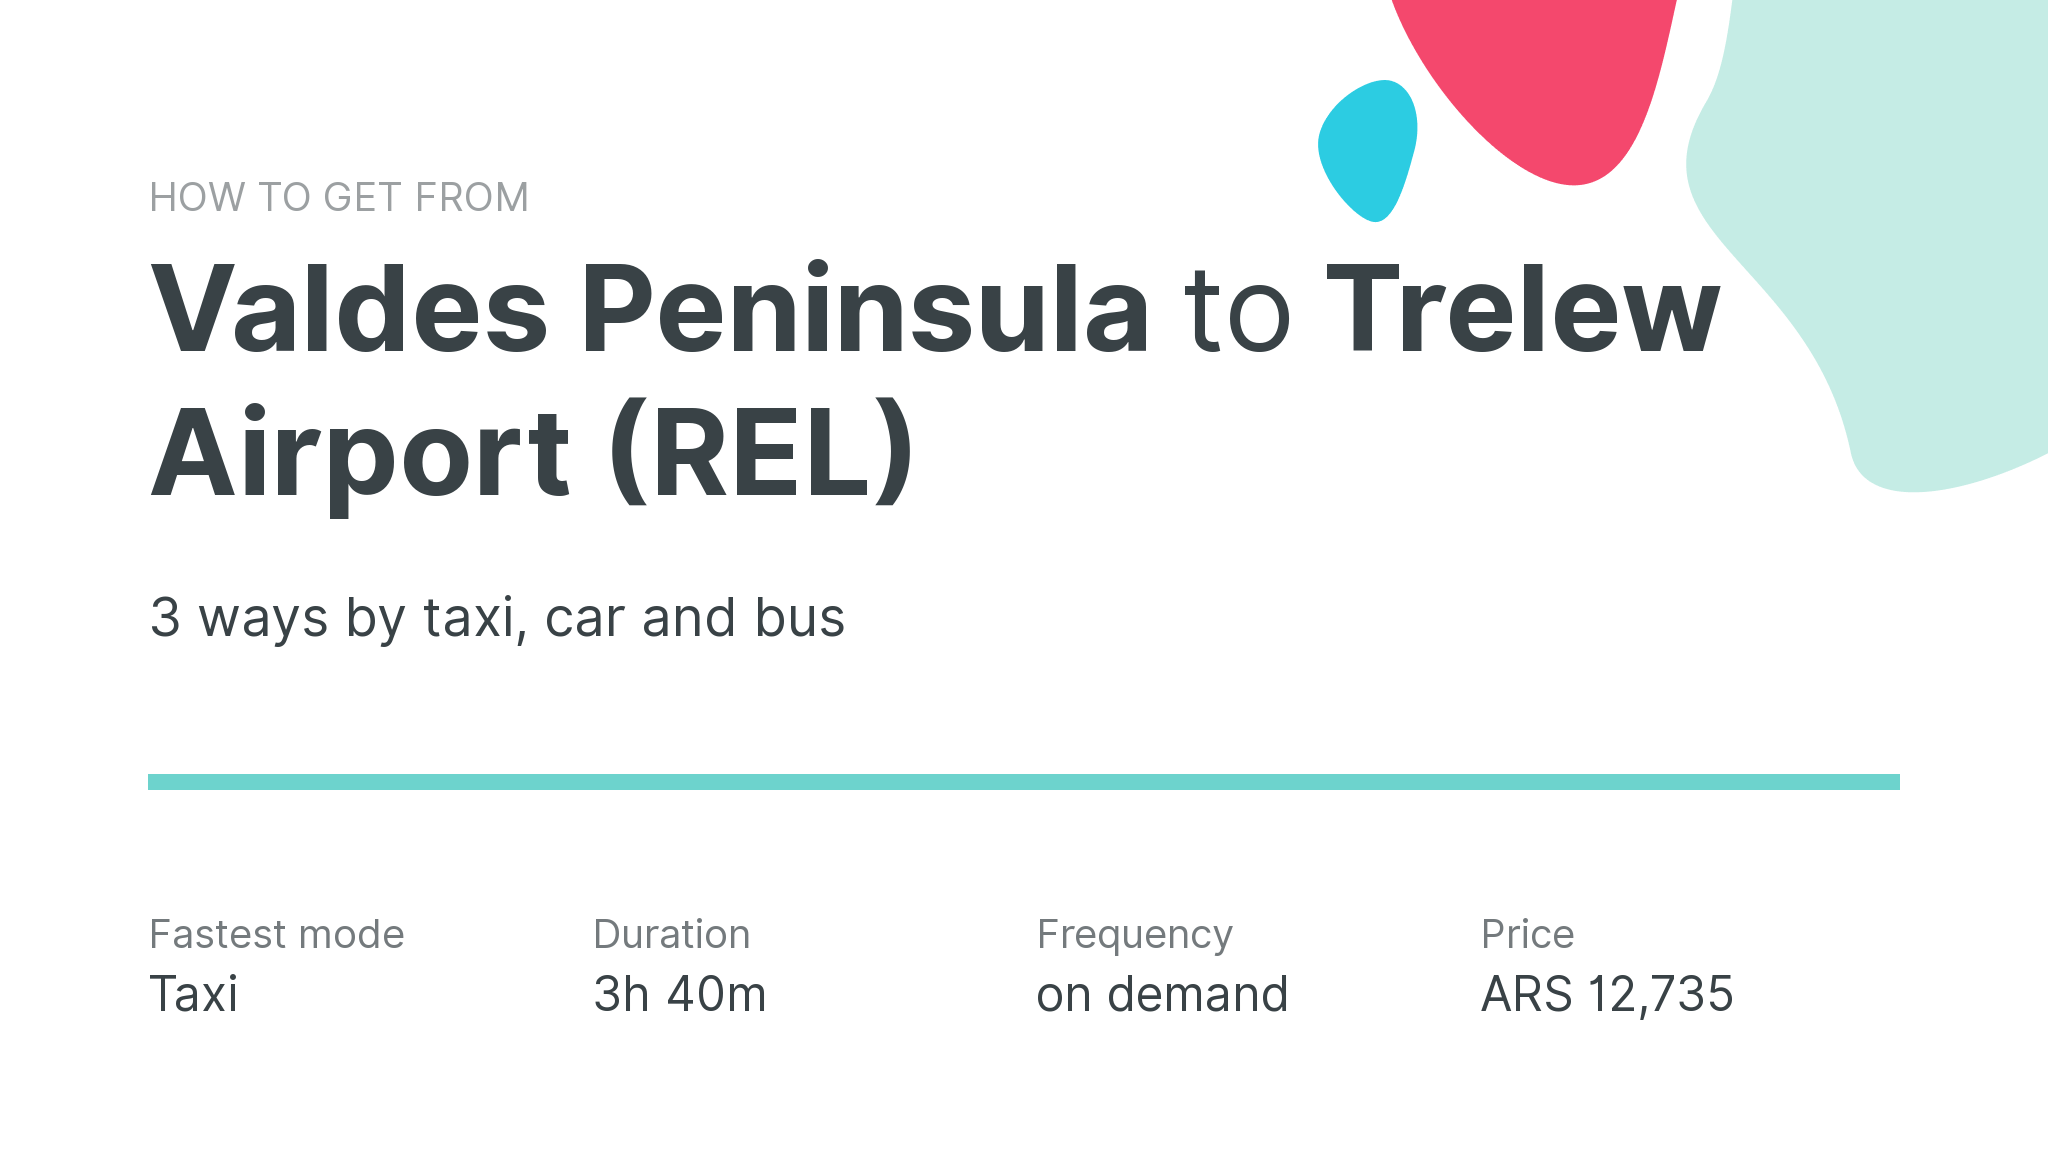 How do I get from Valdes Peninsula to Trelew Airport (REL)